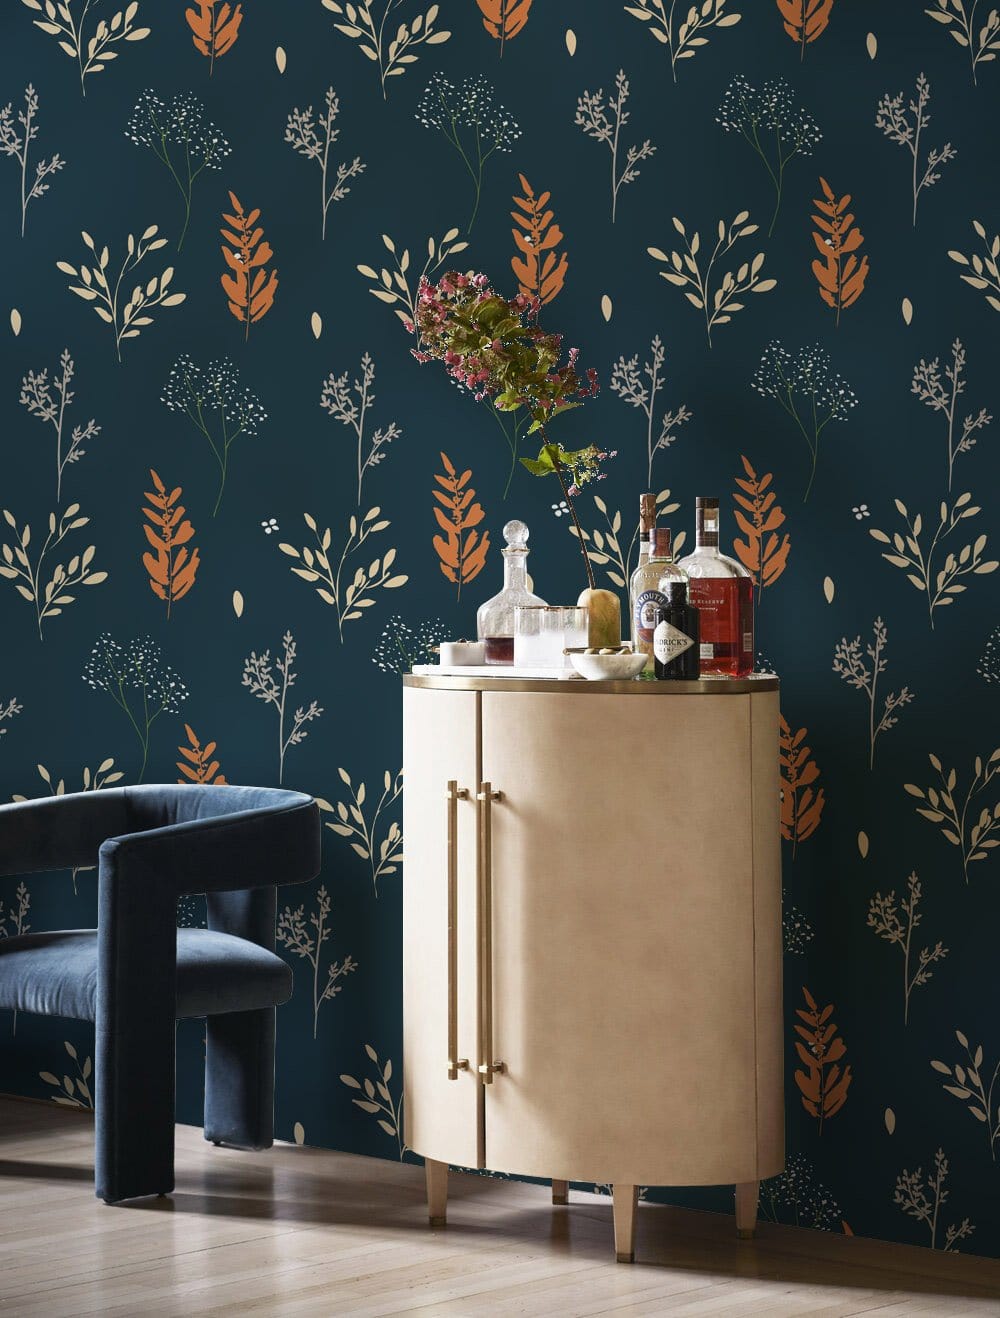 Decorate your living room with this Rice Ears Pattern Wallpaper Mural.